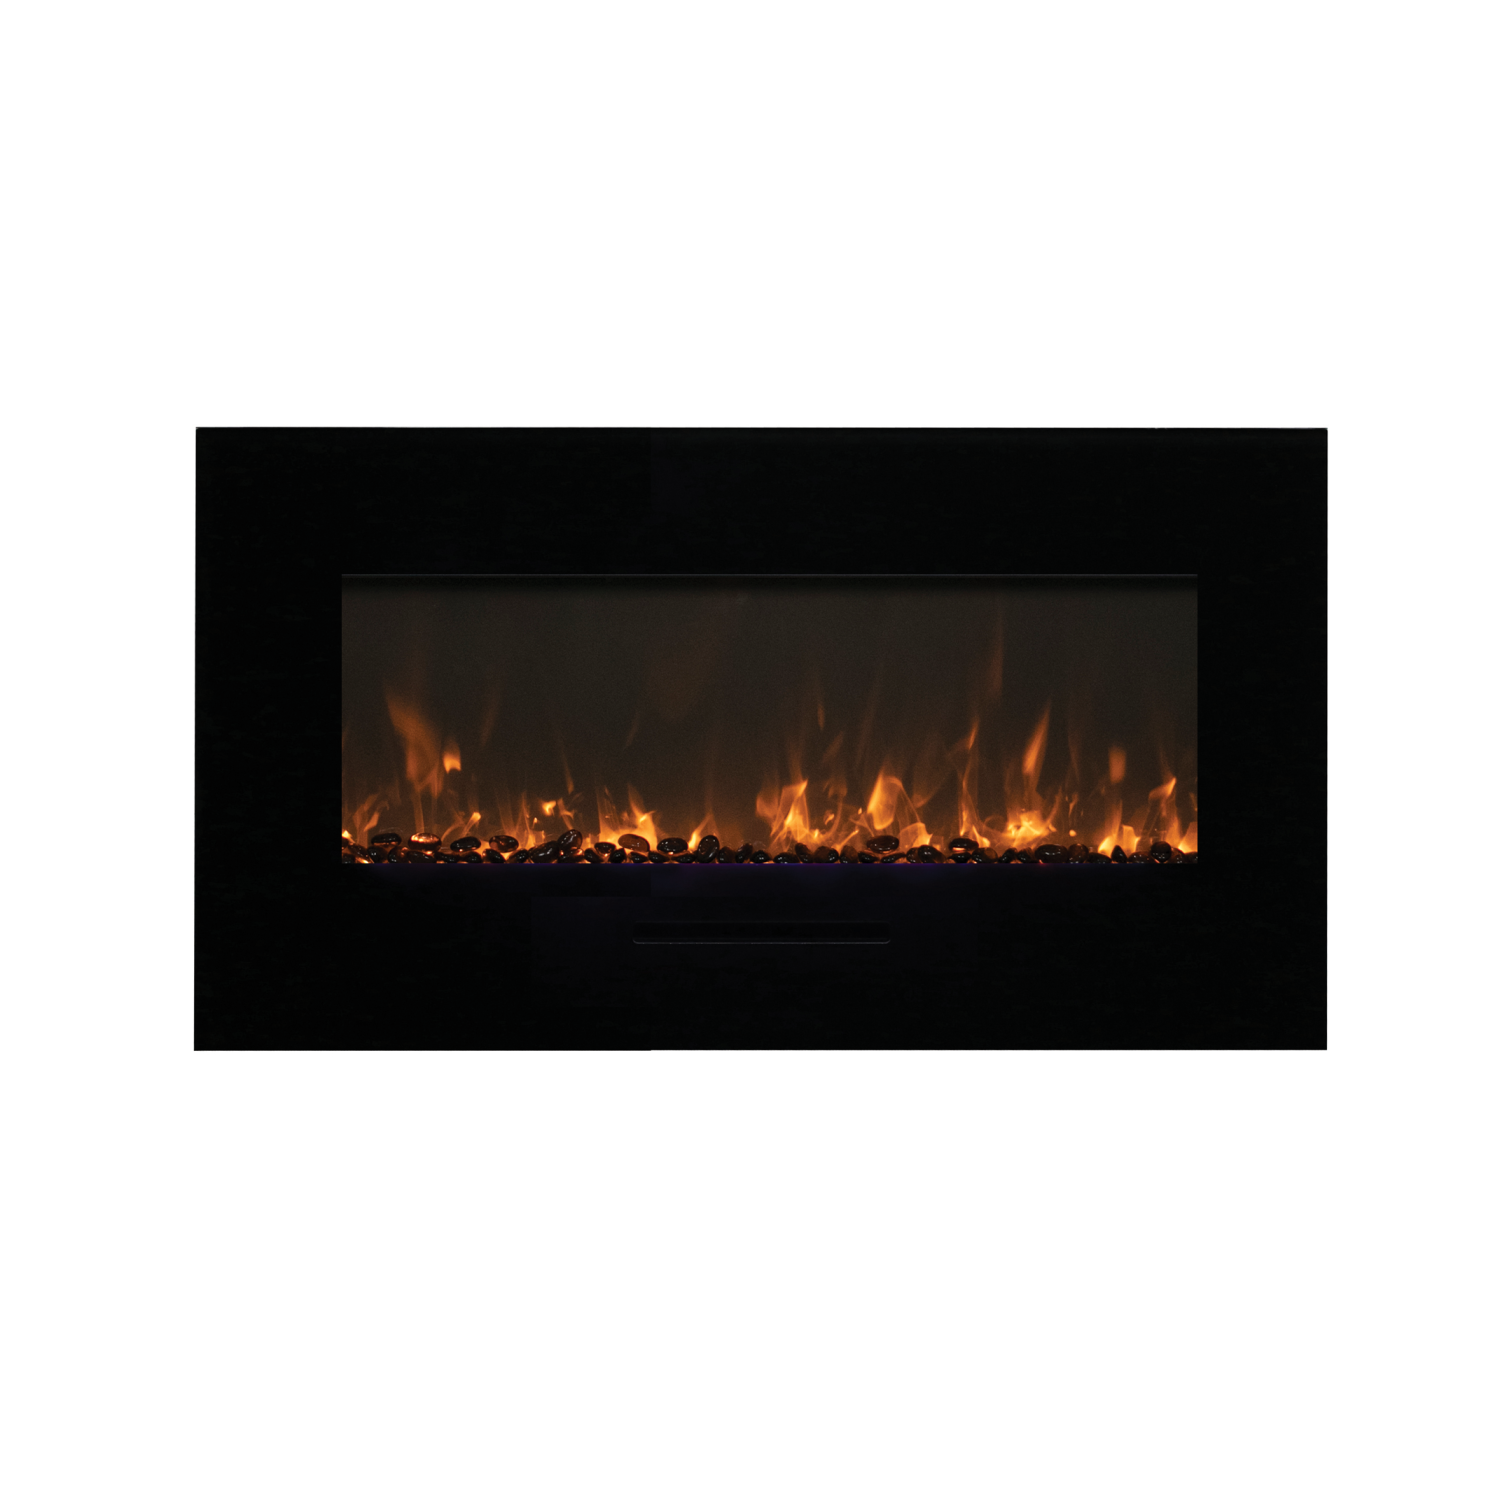 Amantii WM-BI-FI-48-5823-BLKGLS-OOB-1 48″ -Open Box Excellent Condition - Electric Fireplace with Black Glass Surround